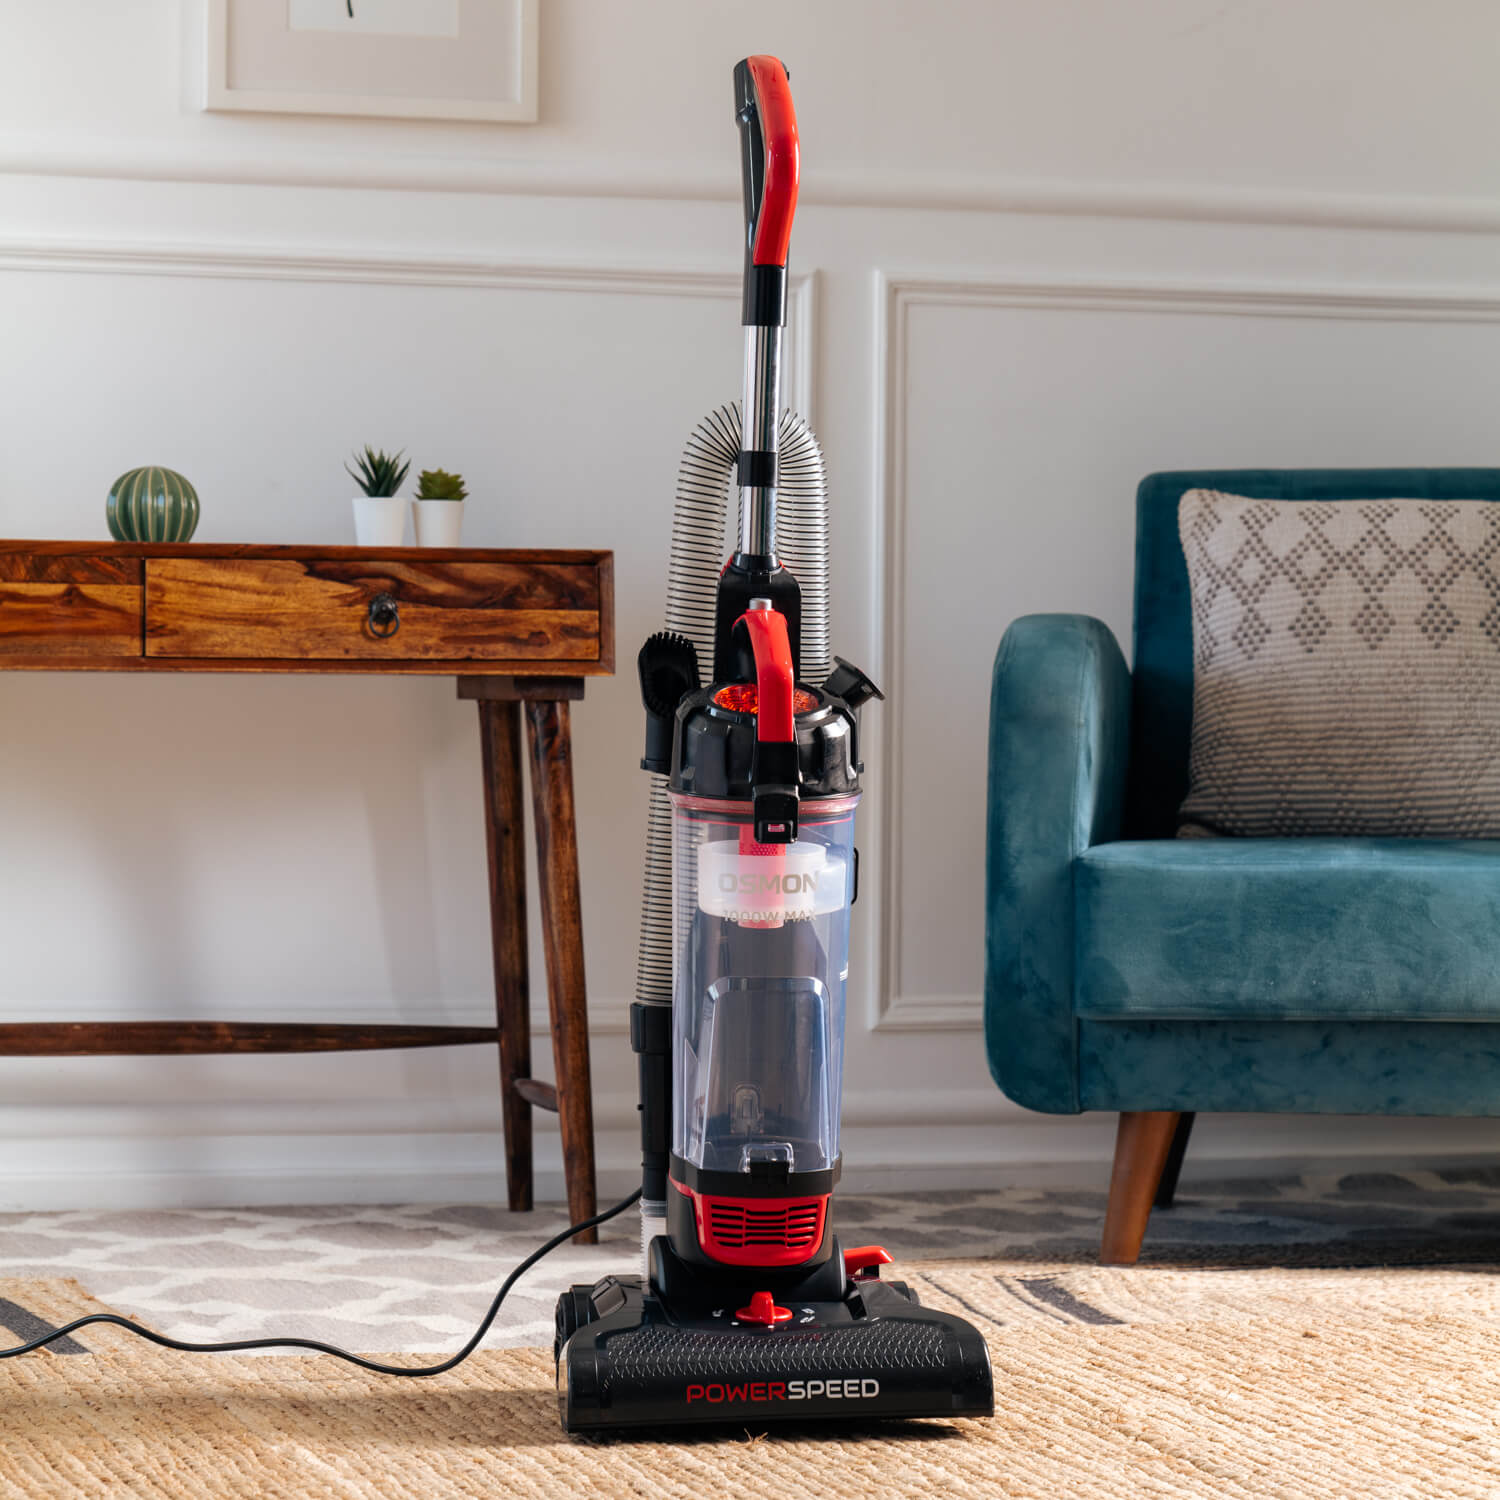 A sleek Red and black vacuum cleaner, the OS 26UBL, stands tall against a backdrop of a clean and tidy living room. Its compact design and HEPA filter make it an ideal choice for effortless cleaning